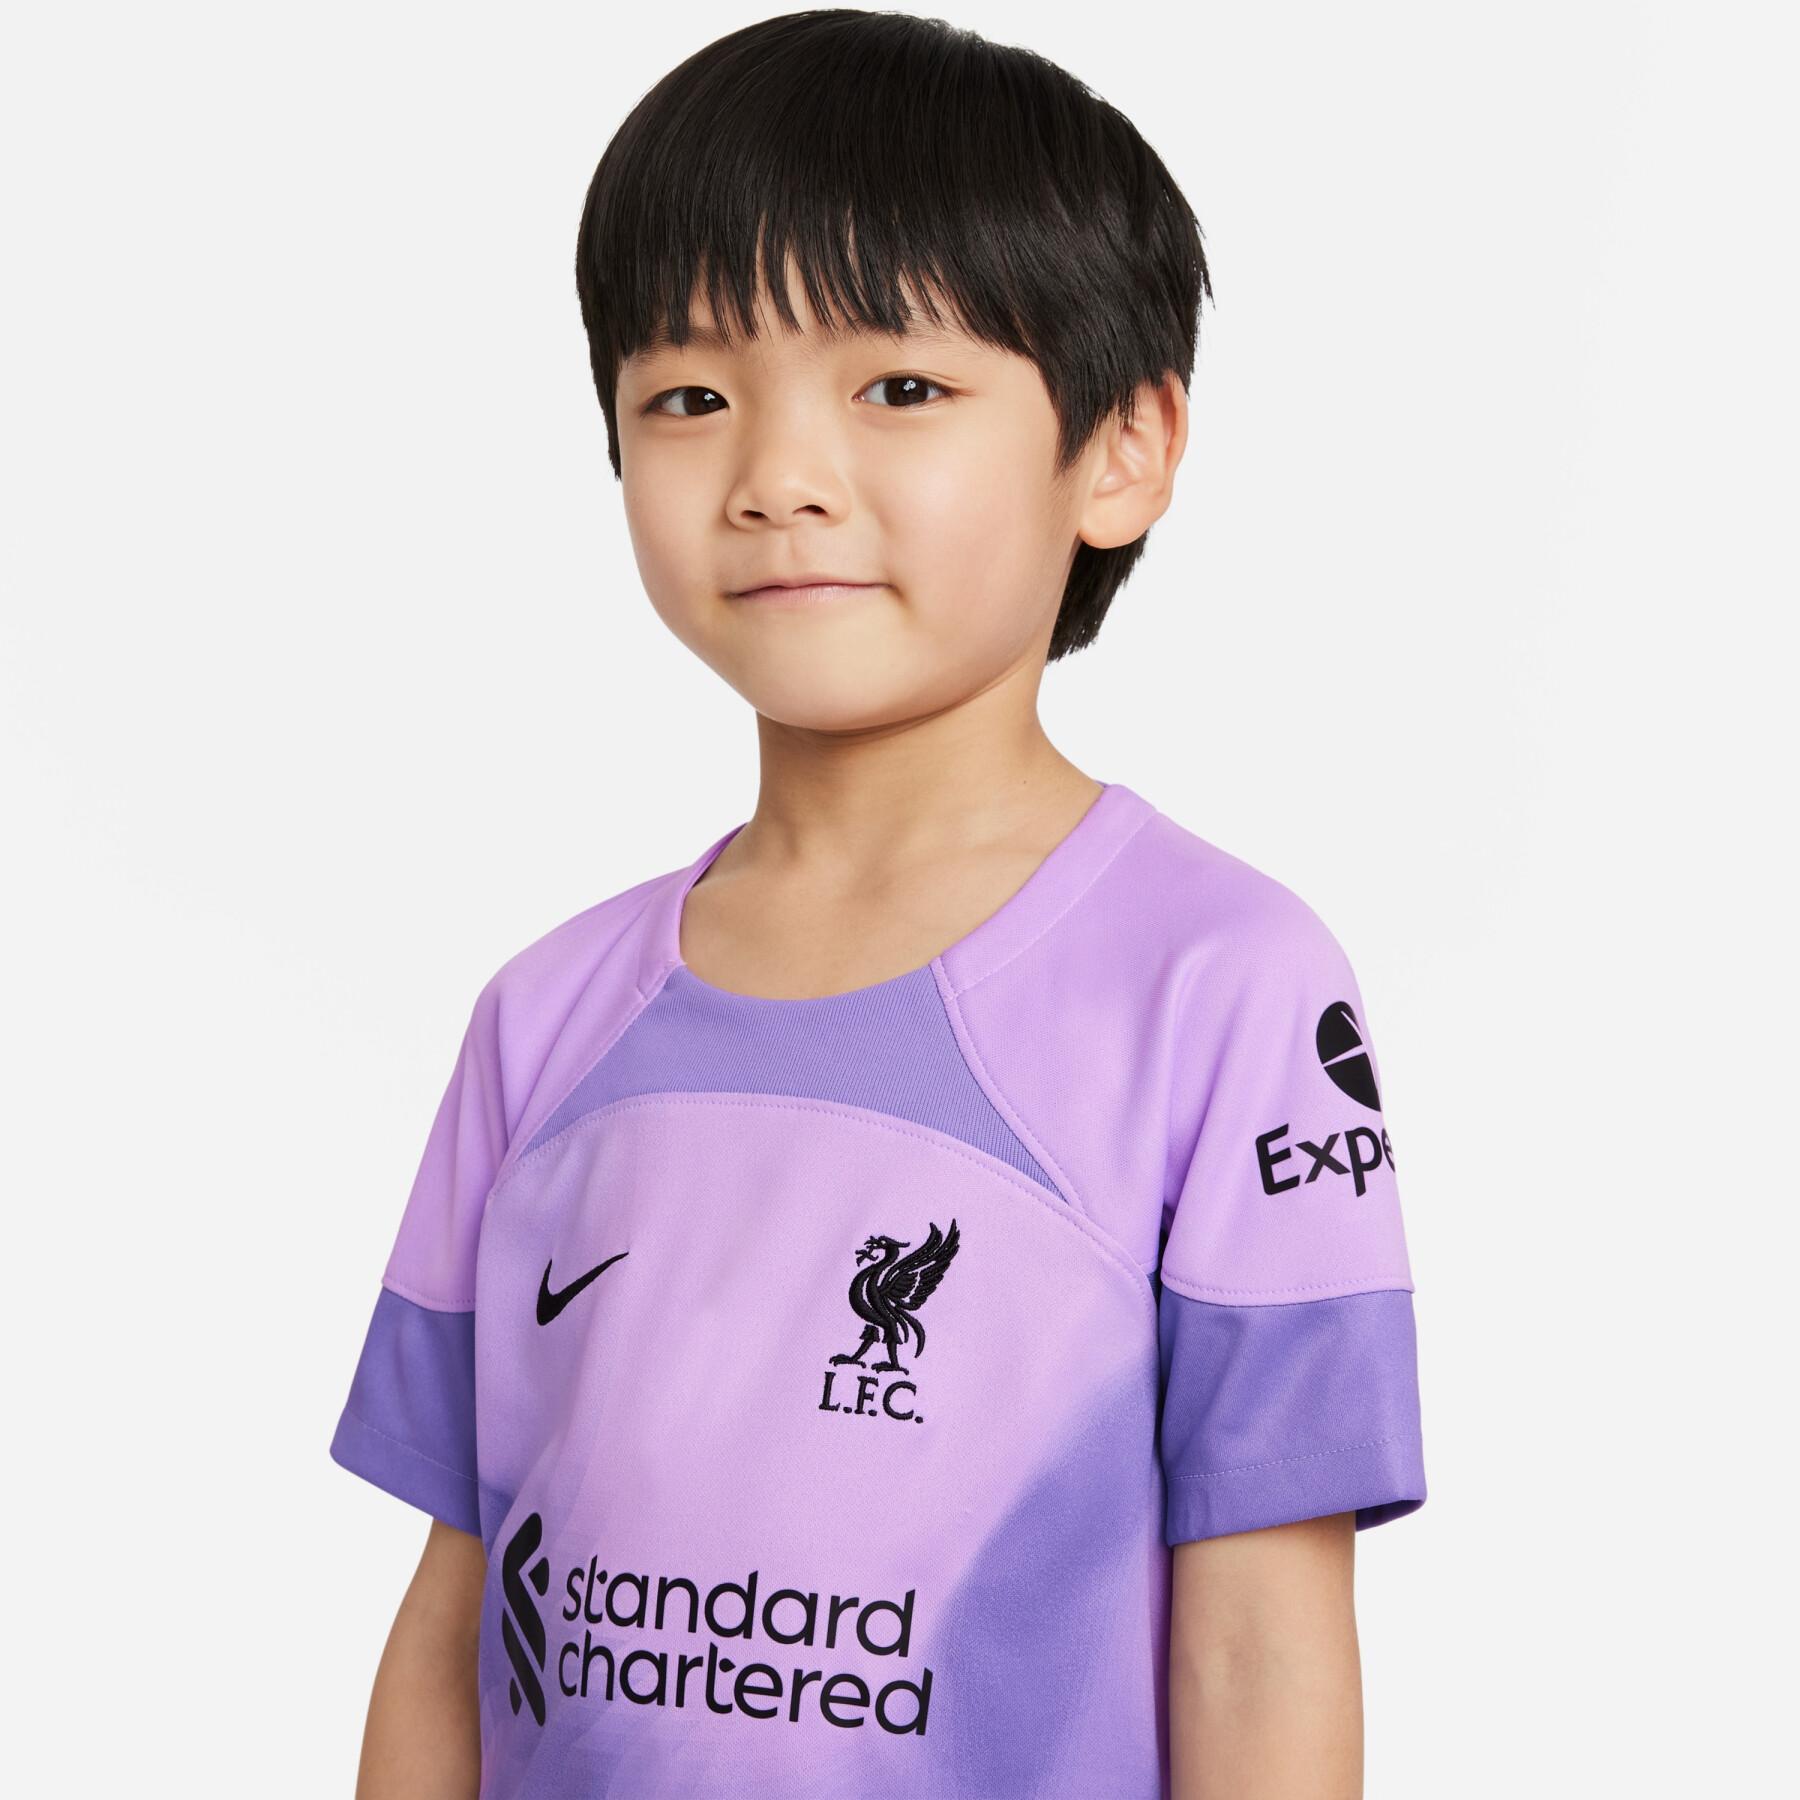 Child care package Liverpool FC 2022/23